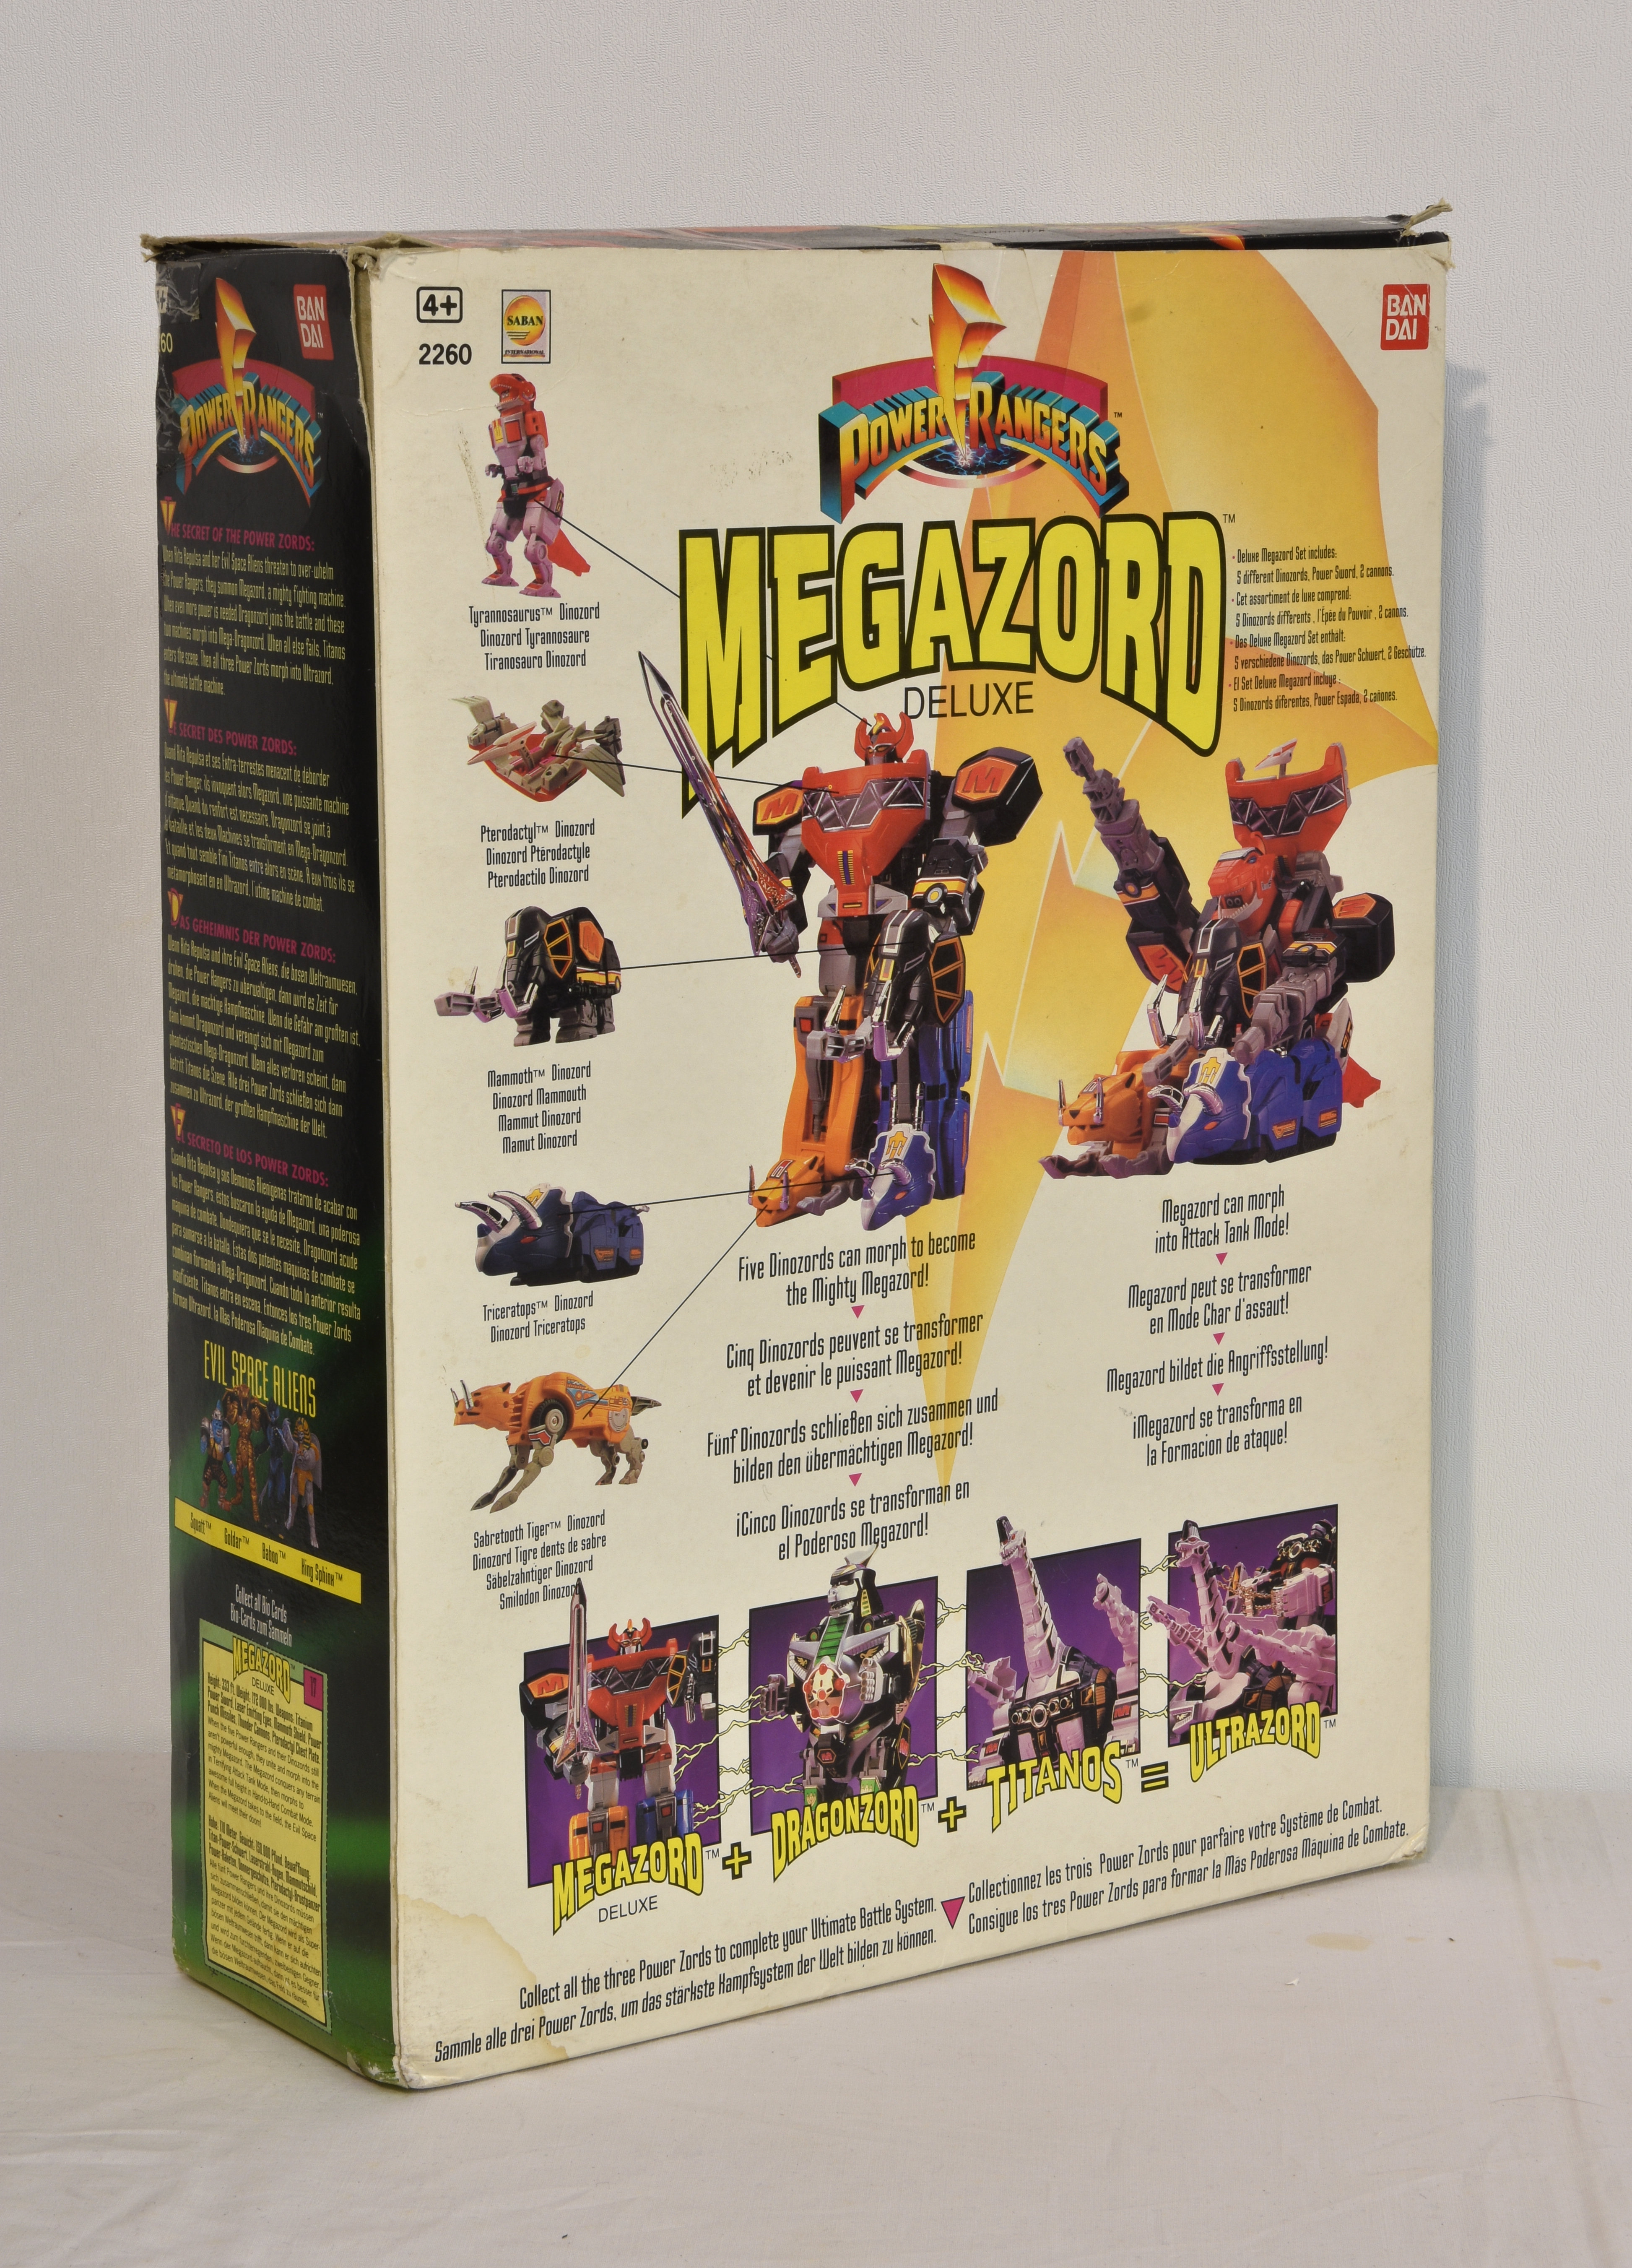 An original boxed vintage 1990s Bandai Power Rangers action figure playsets 2260 Deluxe Megazord, - Image 3 of 3